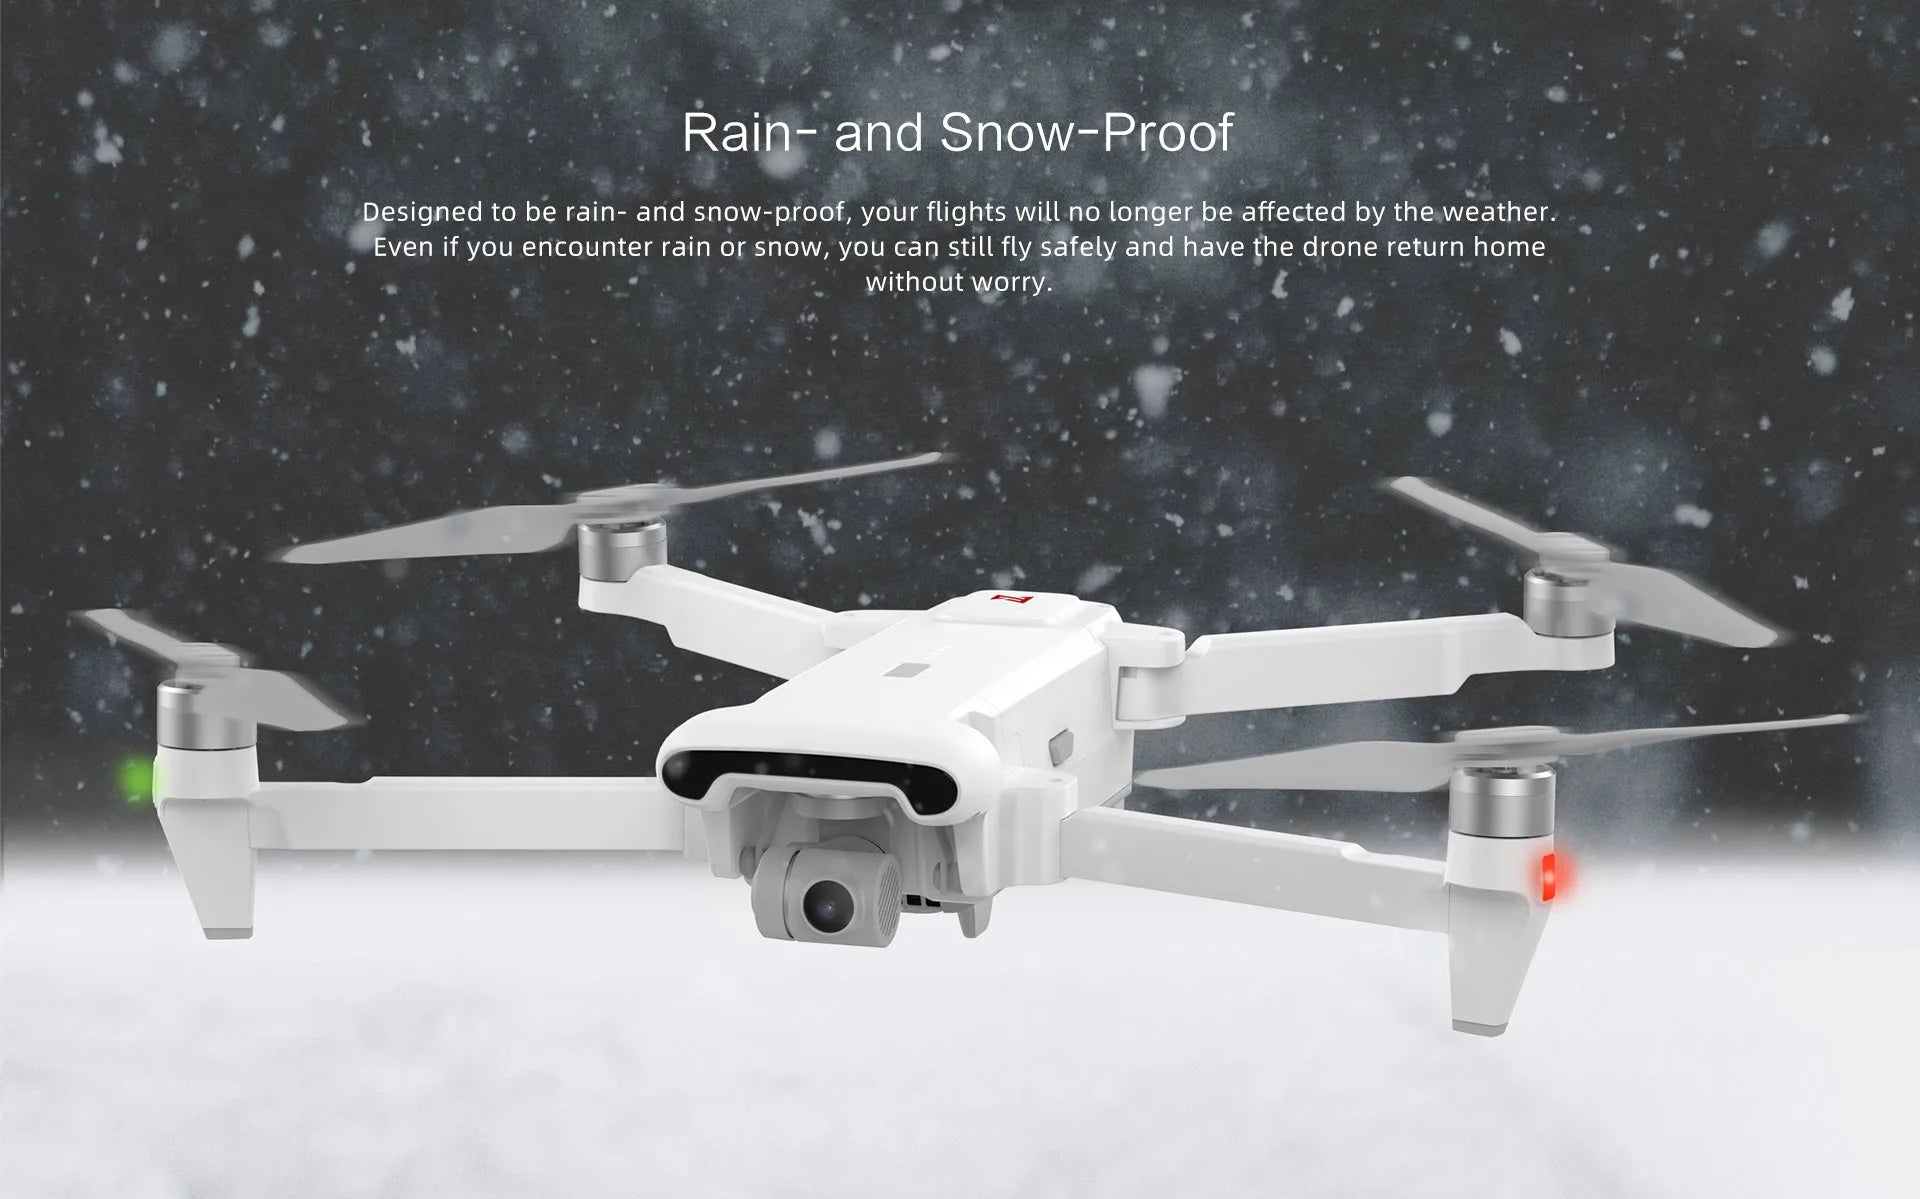 FIMI x8se 2022 V2 Camera Drone, Designed to be rain- and snow-proof your flights will no longer be affected by the